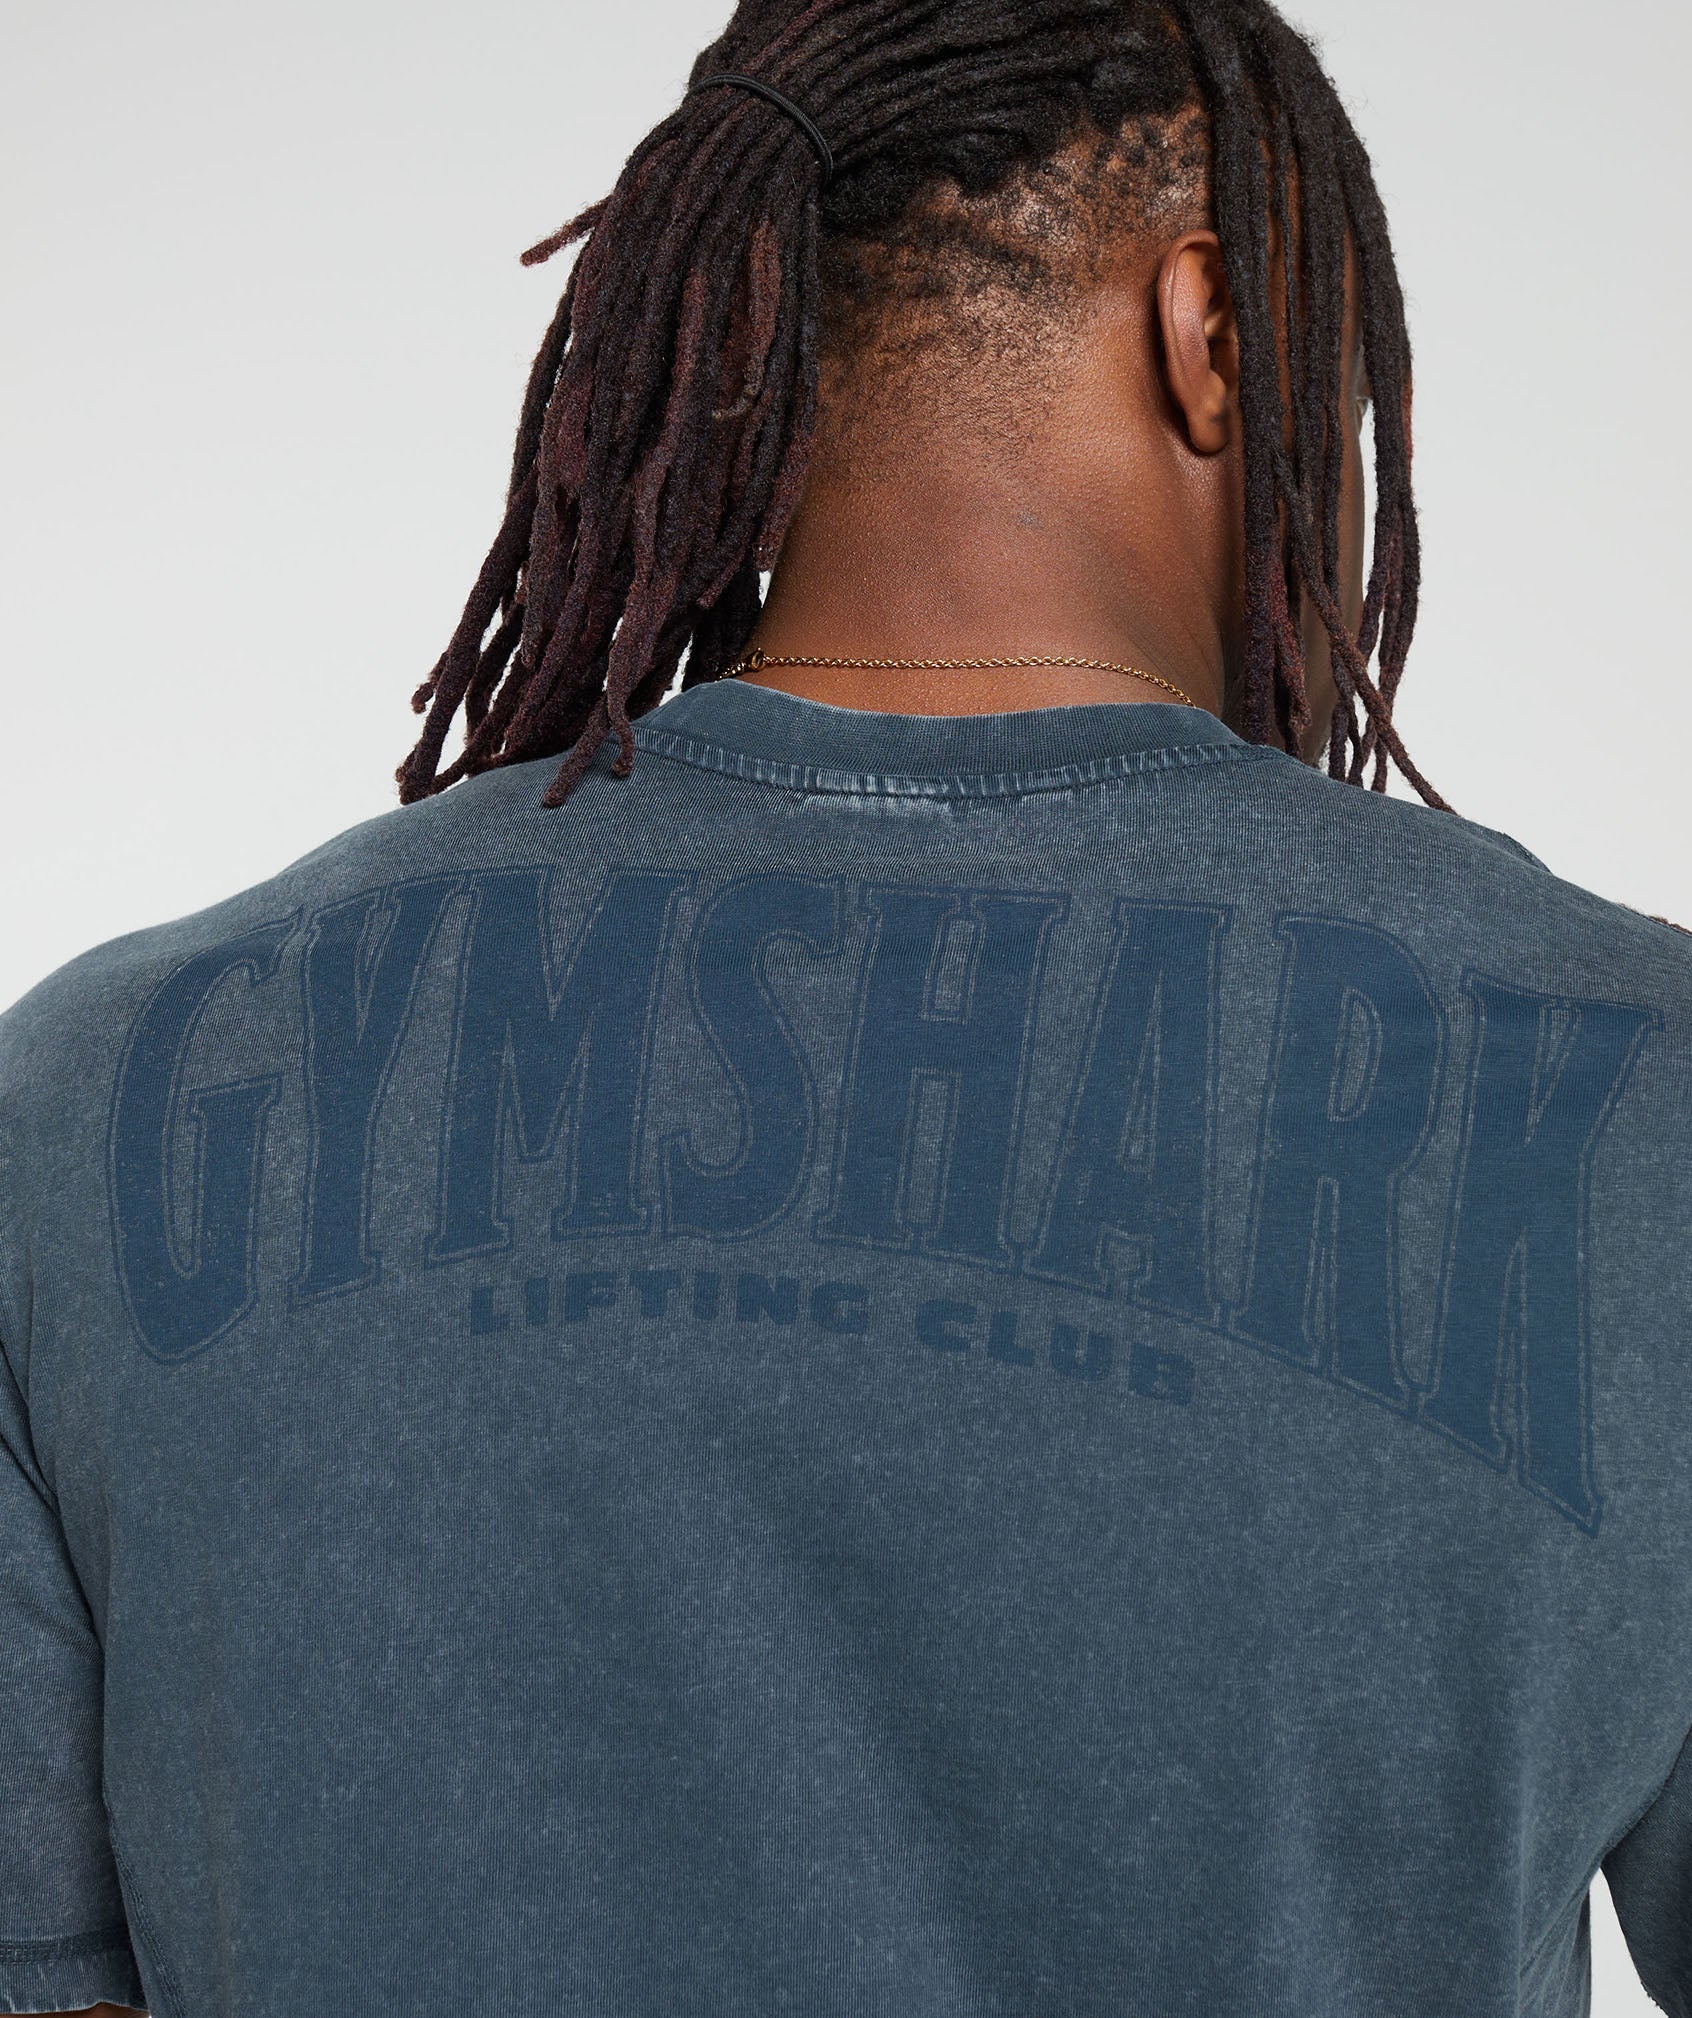 Heritage Washed T-Shirt in Navy - view 5